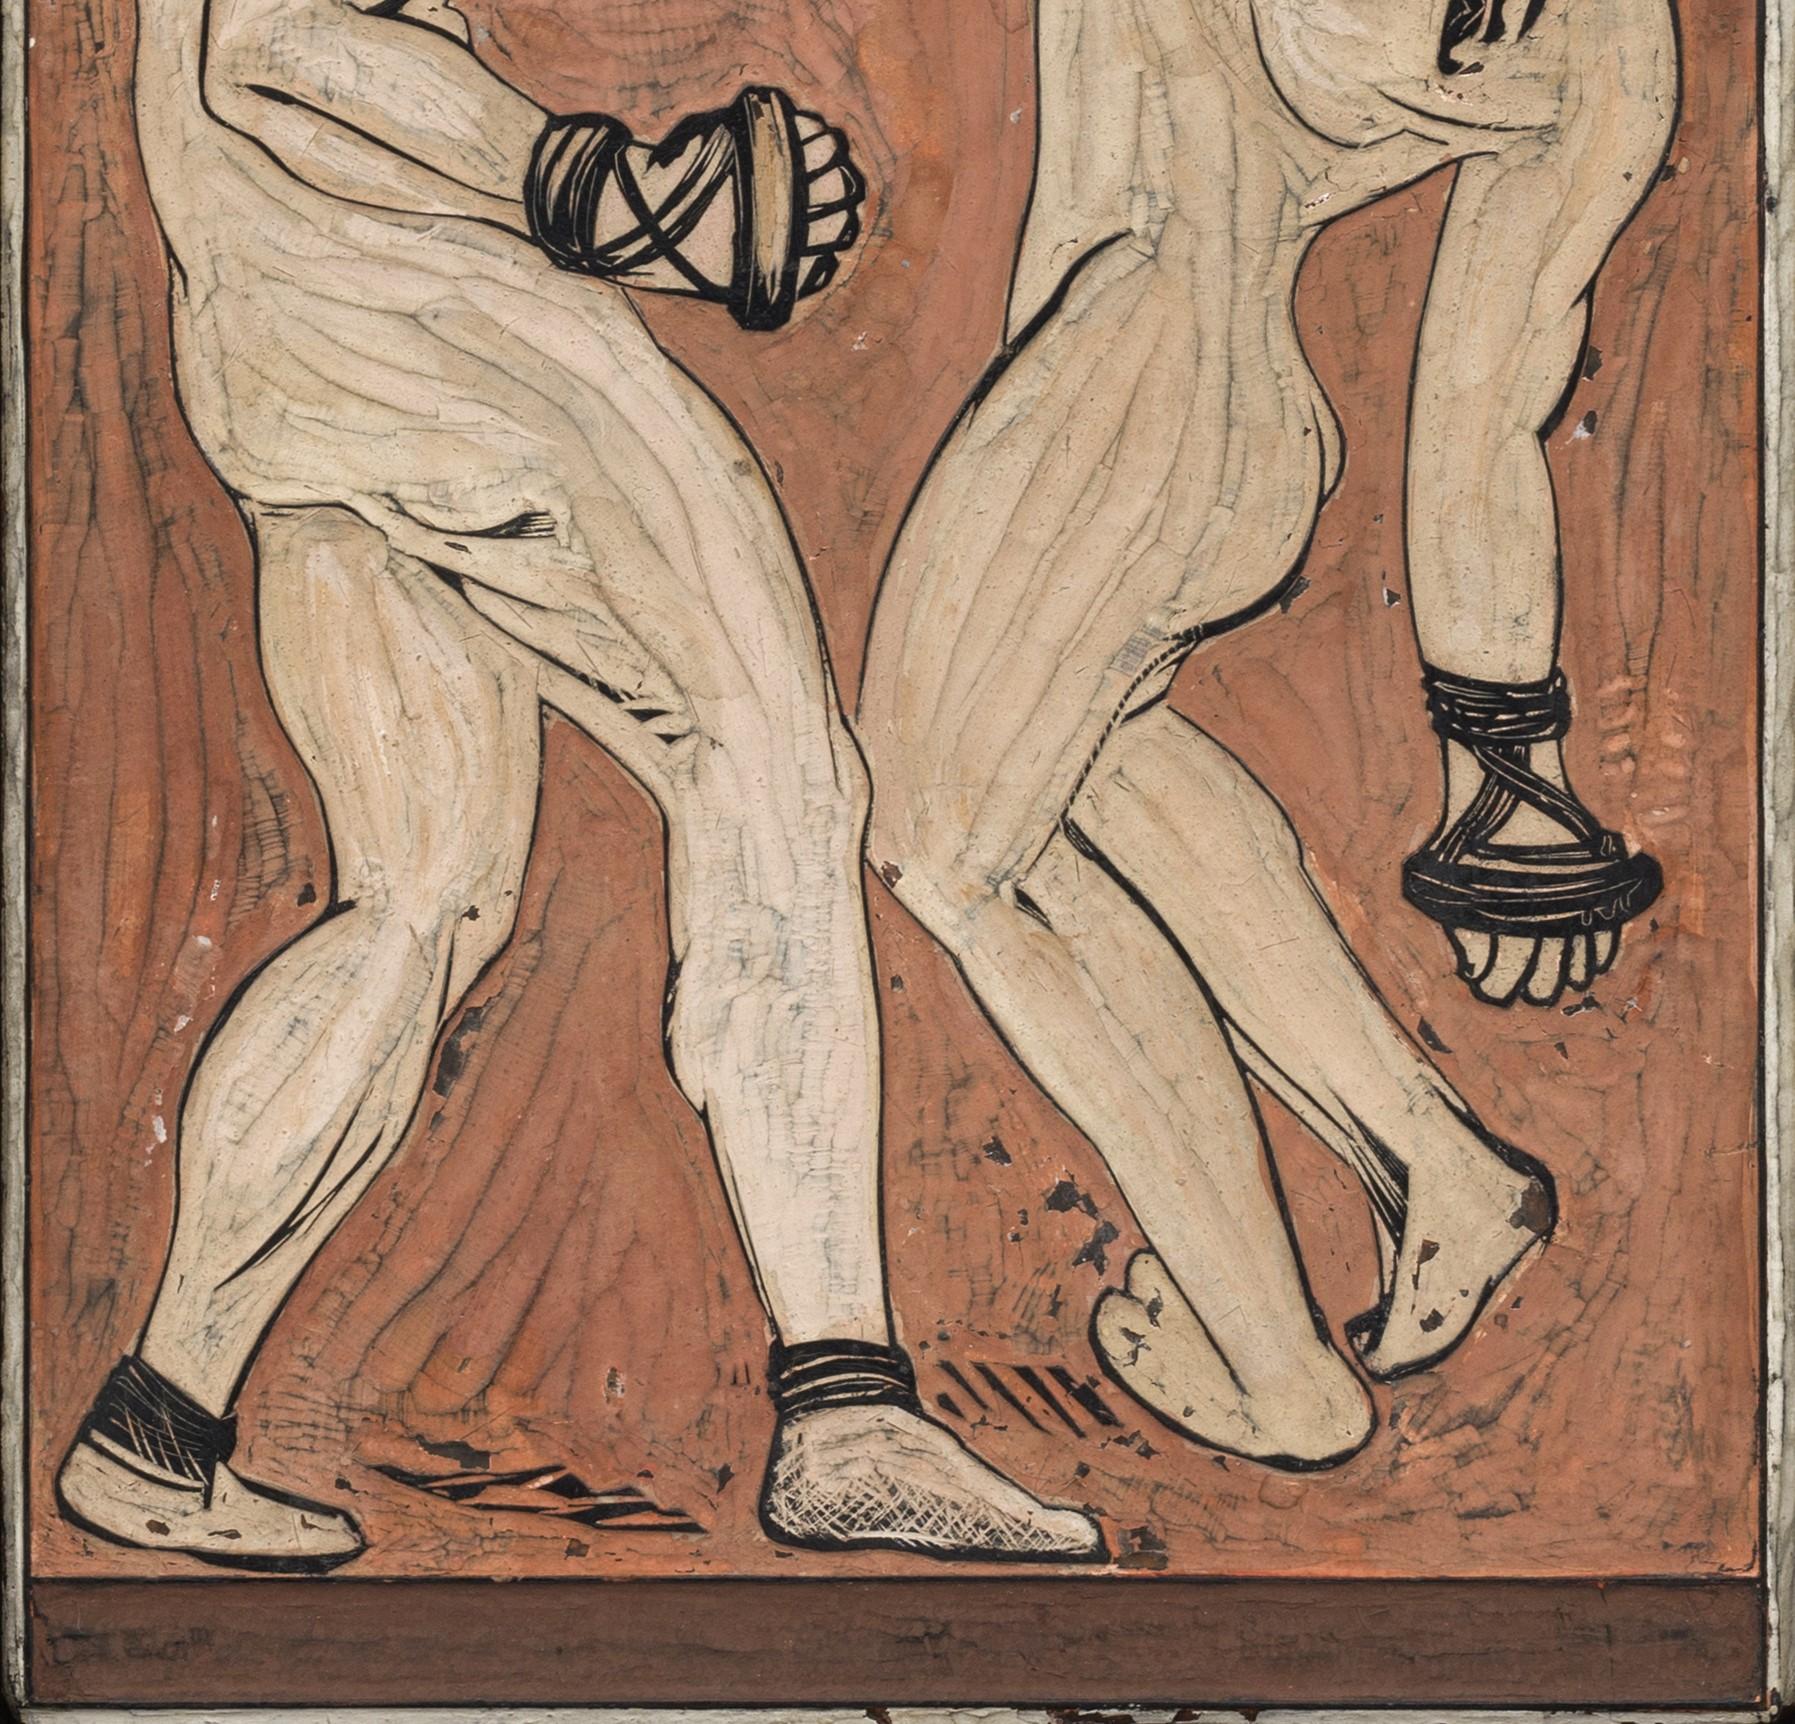 Painted engraved wood, 20.5cm x 13.5cm, (41cm x 34cm framed).  (Provenance: Félix Marcilhac, a French art historian who collected Art Deco objects; Sotheby’s, Paris, 11 March 2014)

A painter, wood engraver, printer, editor, illustrator, and